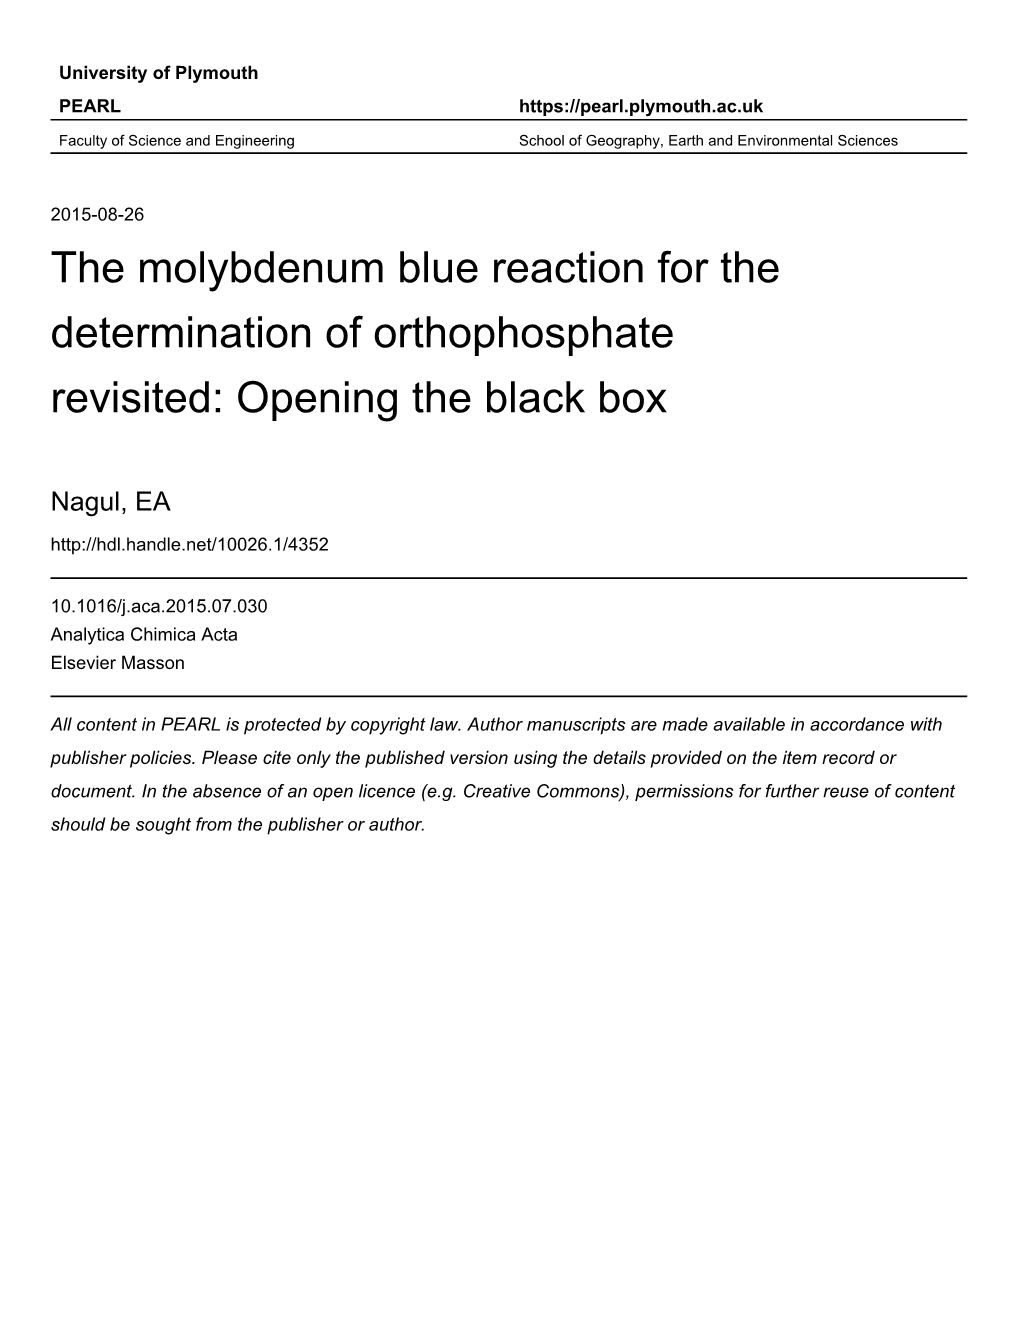 The Molybdenum Blue Reaction for the Determination of Orthophosphate Revisited: Opening the Black Box